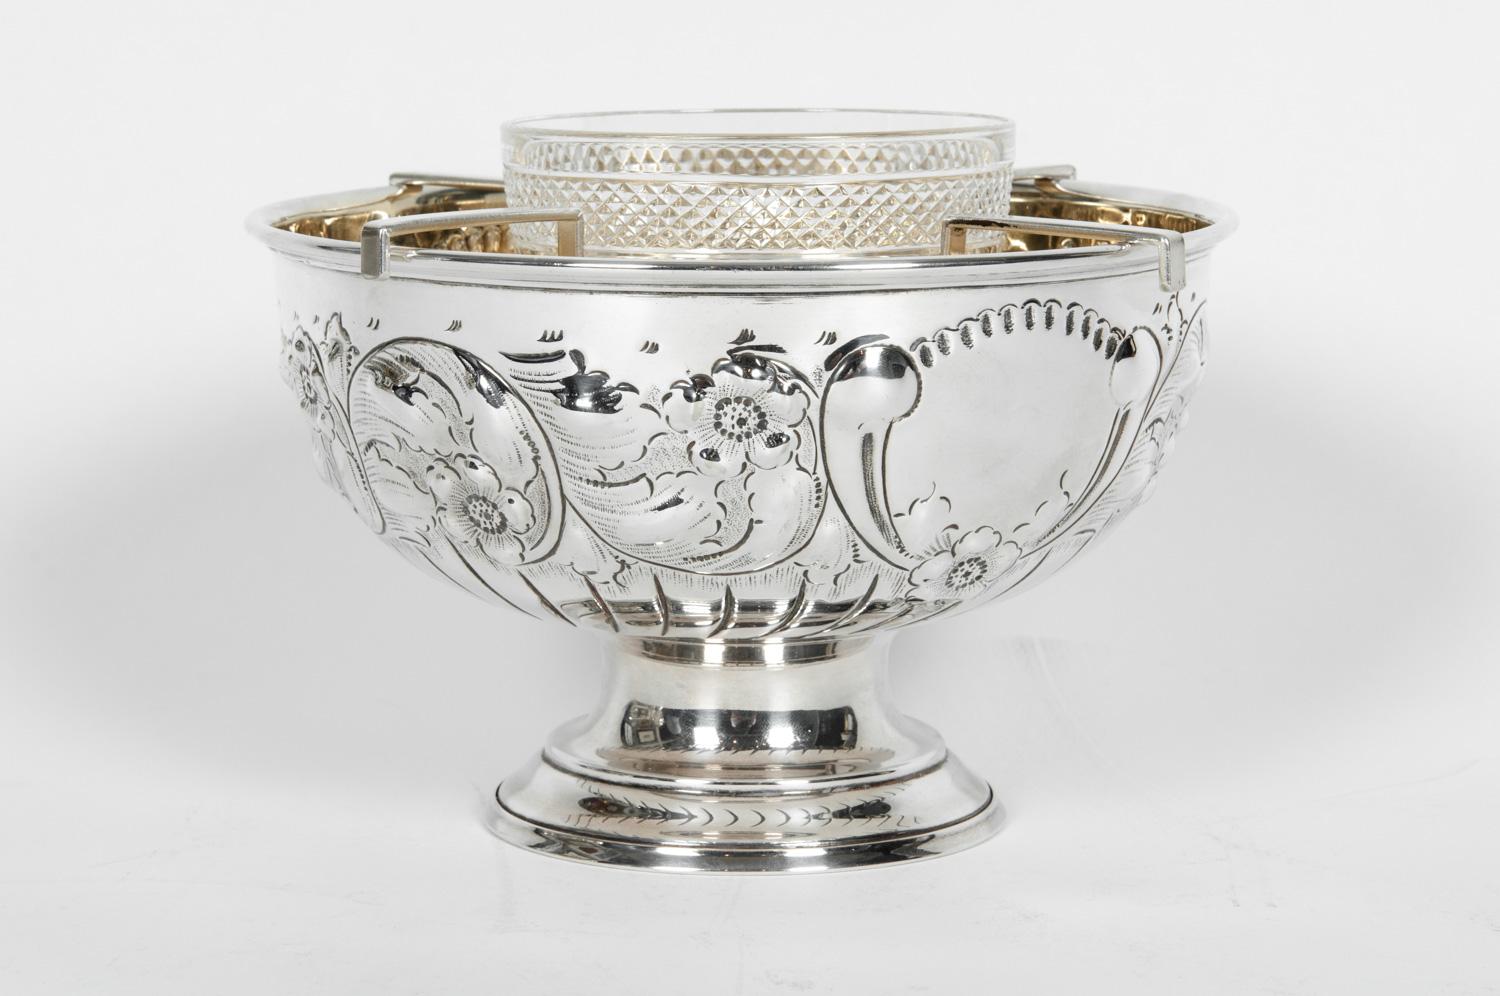 Antique English sterling silver with 24-karat gold wash interior caviar dish set. Each piece is in excellent condition, maker's mark undersigned. The sterling silver bowl measure 8.4 inches diameter x 5 inches high. The crystal caviar bowl is about